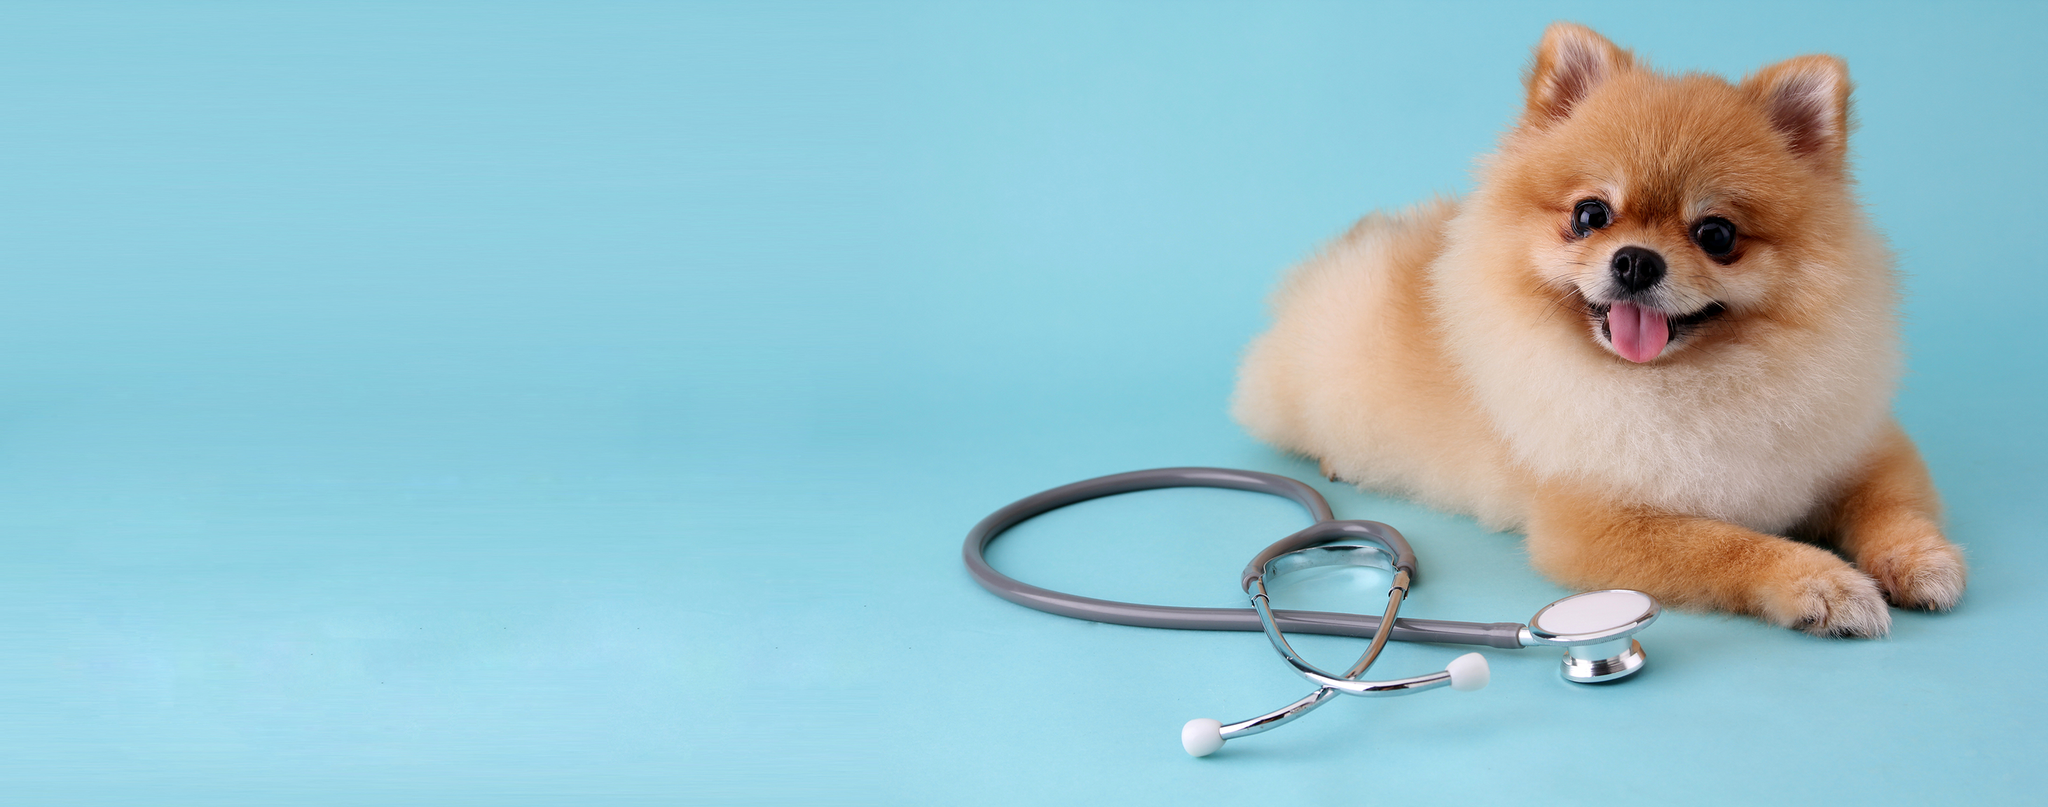 Pomeranian dog sitting beside a veterinarian's stethoscope with a light blue background.